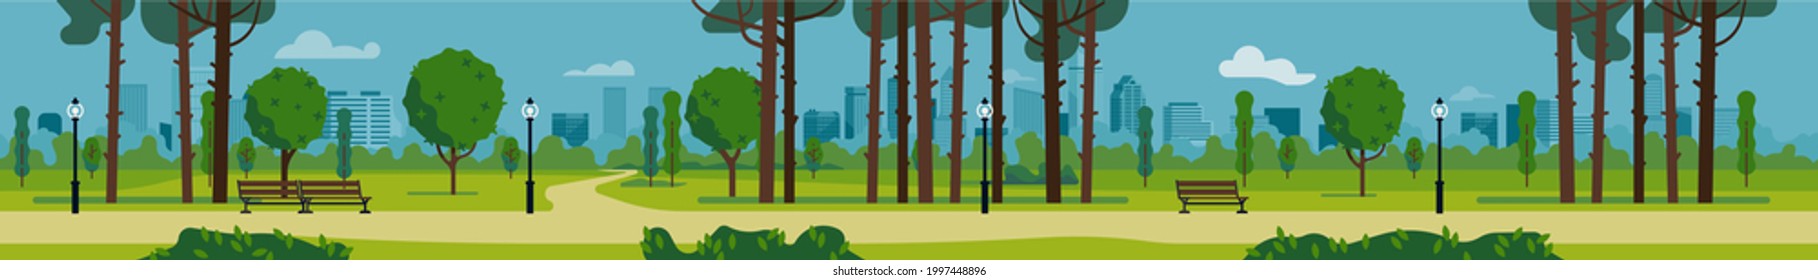 Looped vector flat style panoramic landscape on city park with abstract modern buildings skyline in the distance, blue sky, trees, walking path with benches and lamp posts. Ideal for motion design